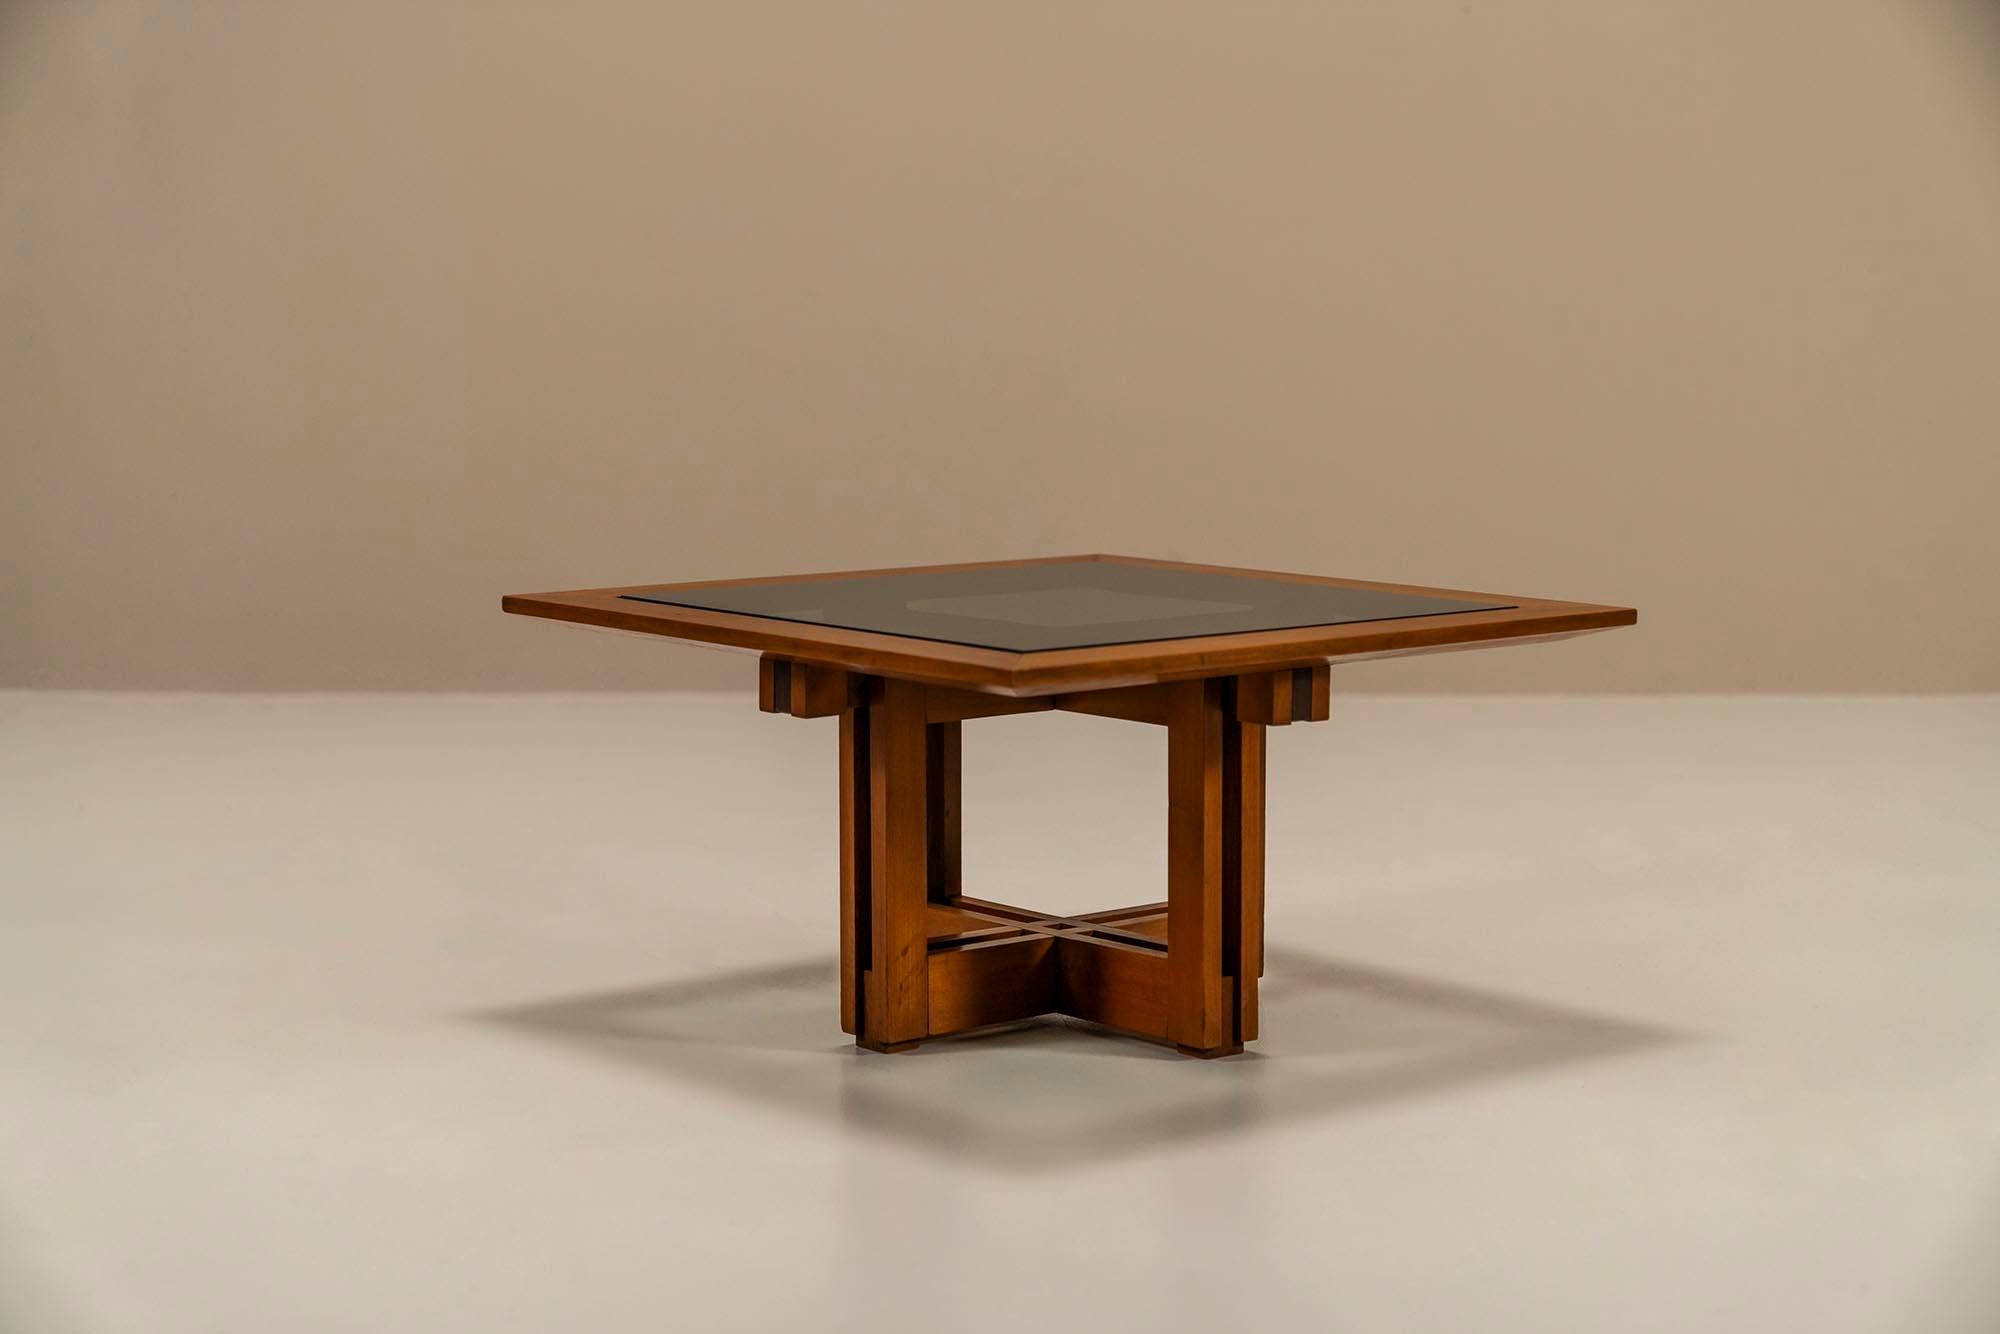 Coffee table in ashwood and Mansonia-walnut by Fausto Bontempi. The Italian architect Fausto Bontempi was a very active architect in the Brescia region but relatively undiscovered elsewhere. He has a number of special projects to his credit, such as